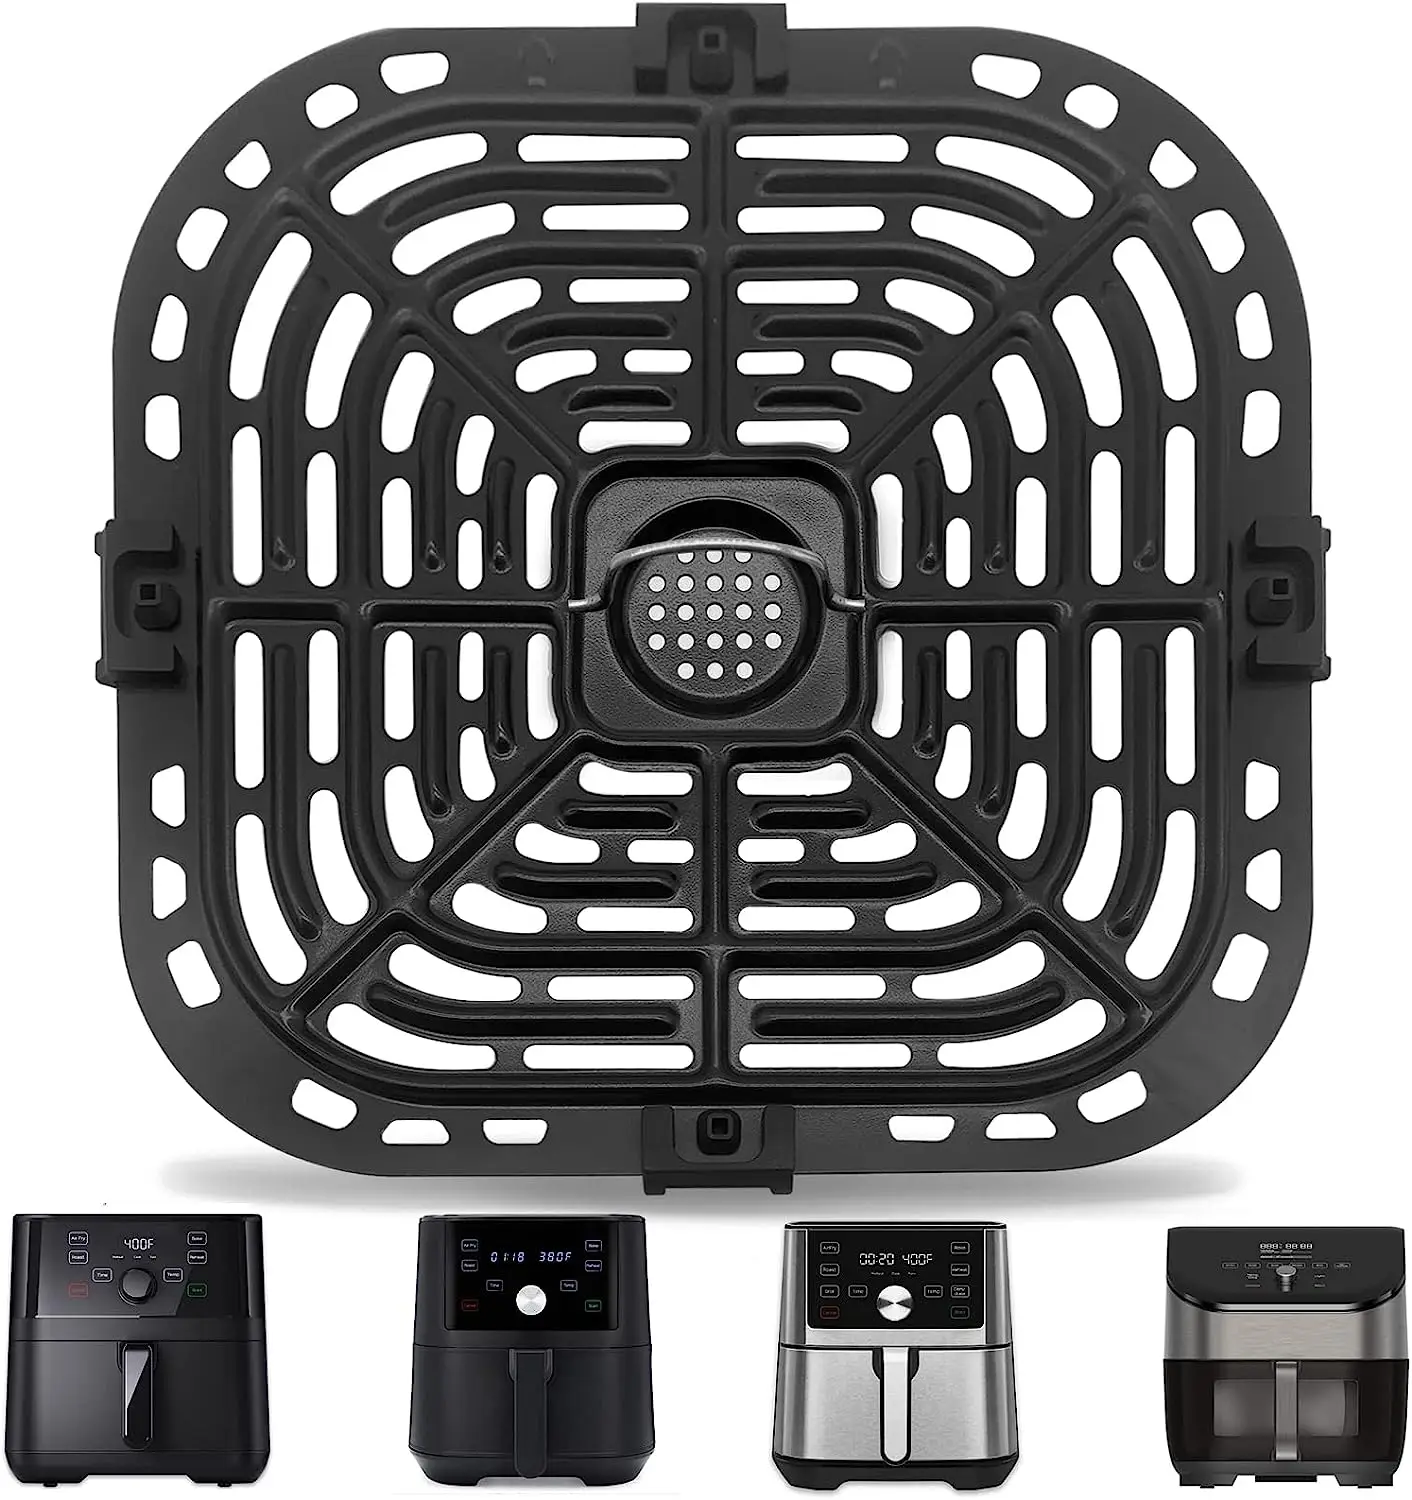  Air fryer Accessories for Instant Pot Vortex Plus 6 in 1 4 Quart  Air Fryer Oven, 7.3''×7.3'' Square Food Grade Air Fryer Grill Pan Grill  Plate Crisper Plate Replacement Parts Tray